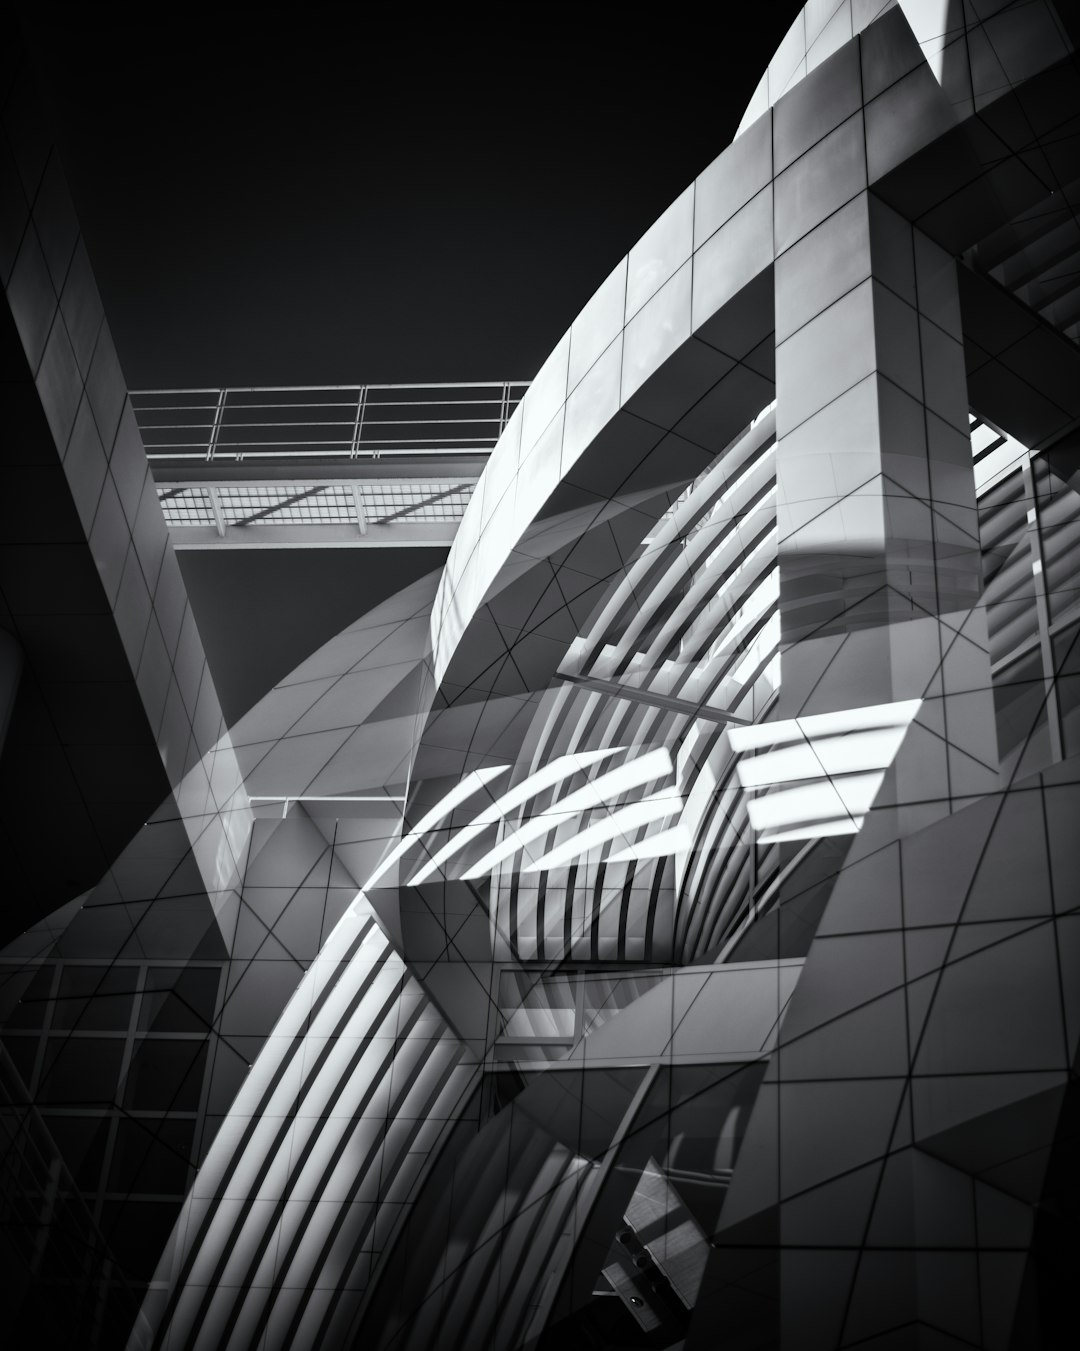 Black and white photography of an abstract geometric architecture from an archdaily photo shoot, with rich details in the style of the photographer. –ar 51:64